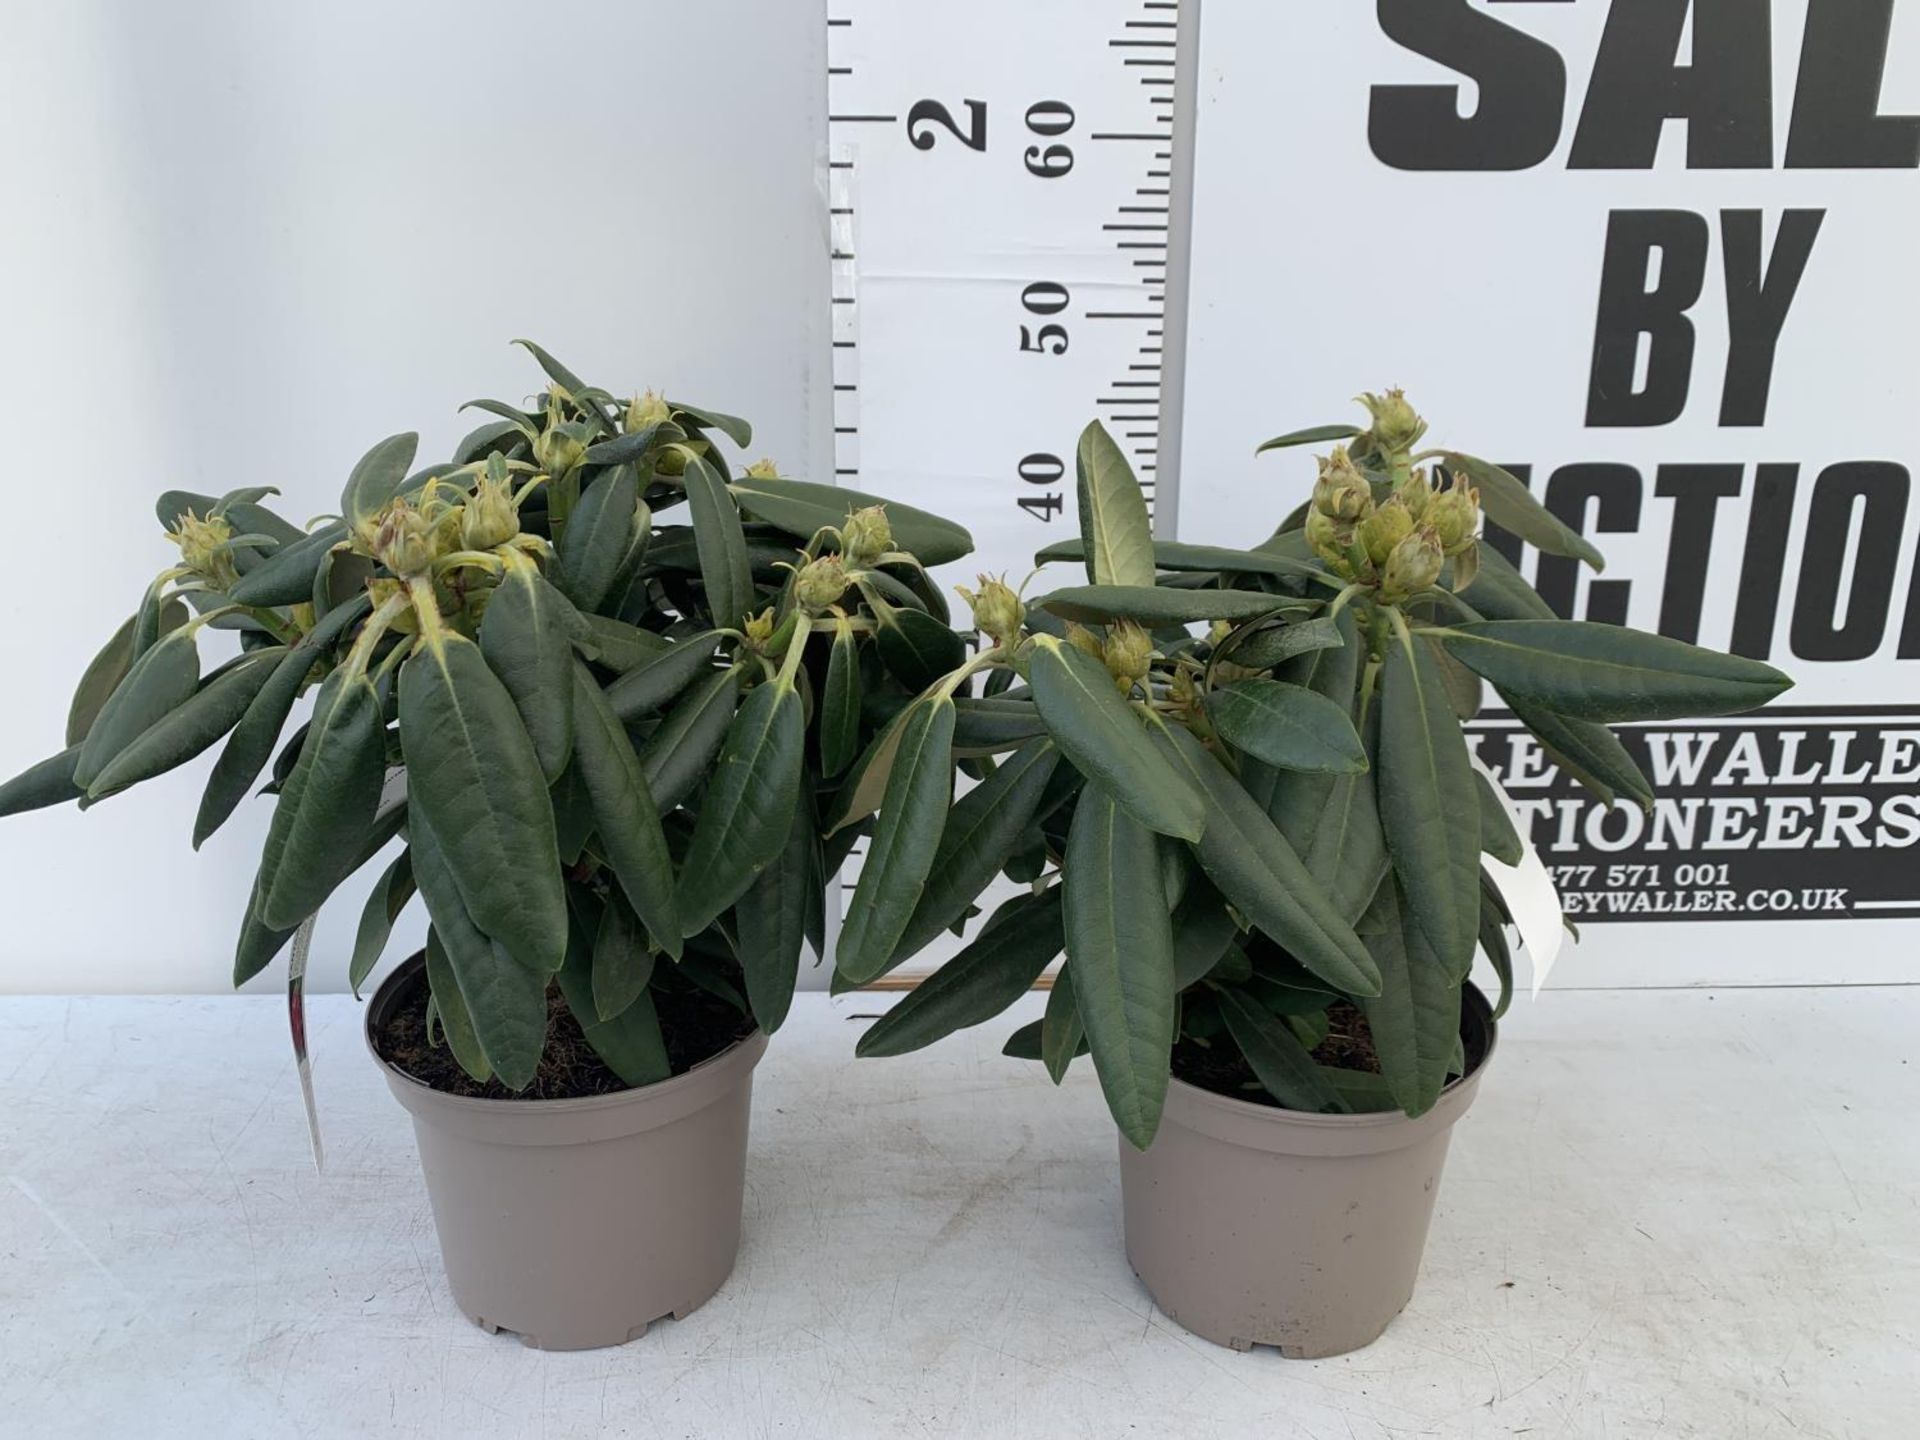 TWO RHODODENDRONS FANTASTICA RED IN 3 LTR POTS APPROX 70CM IN HEIGHT PLUS VAT TO BE SOLD FOR THE TWO - Image 2 of 8